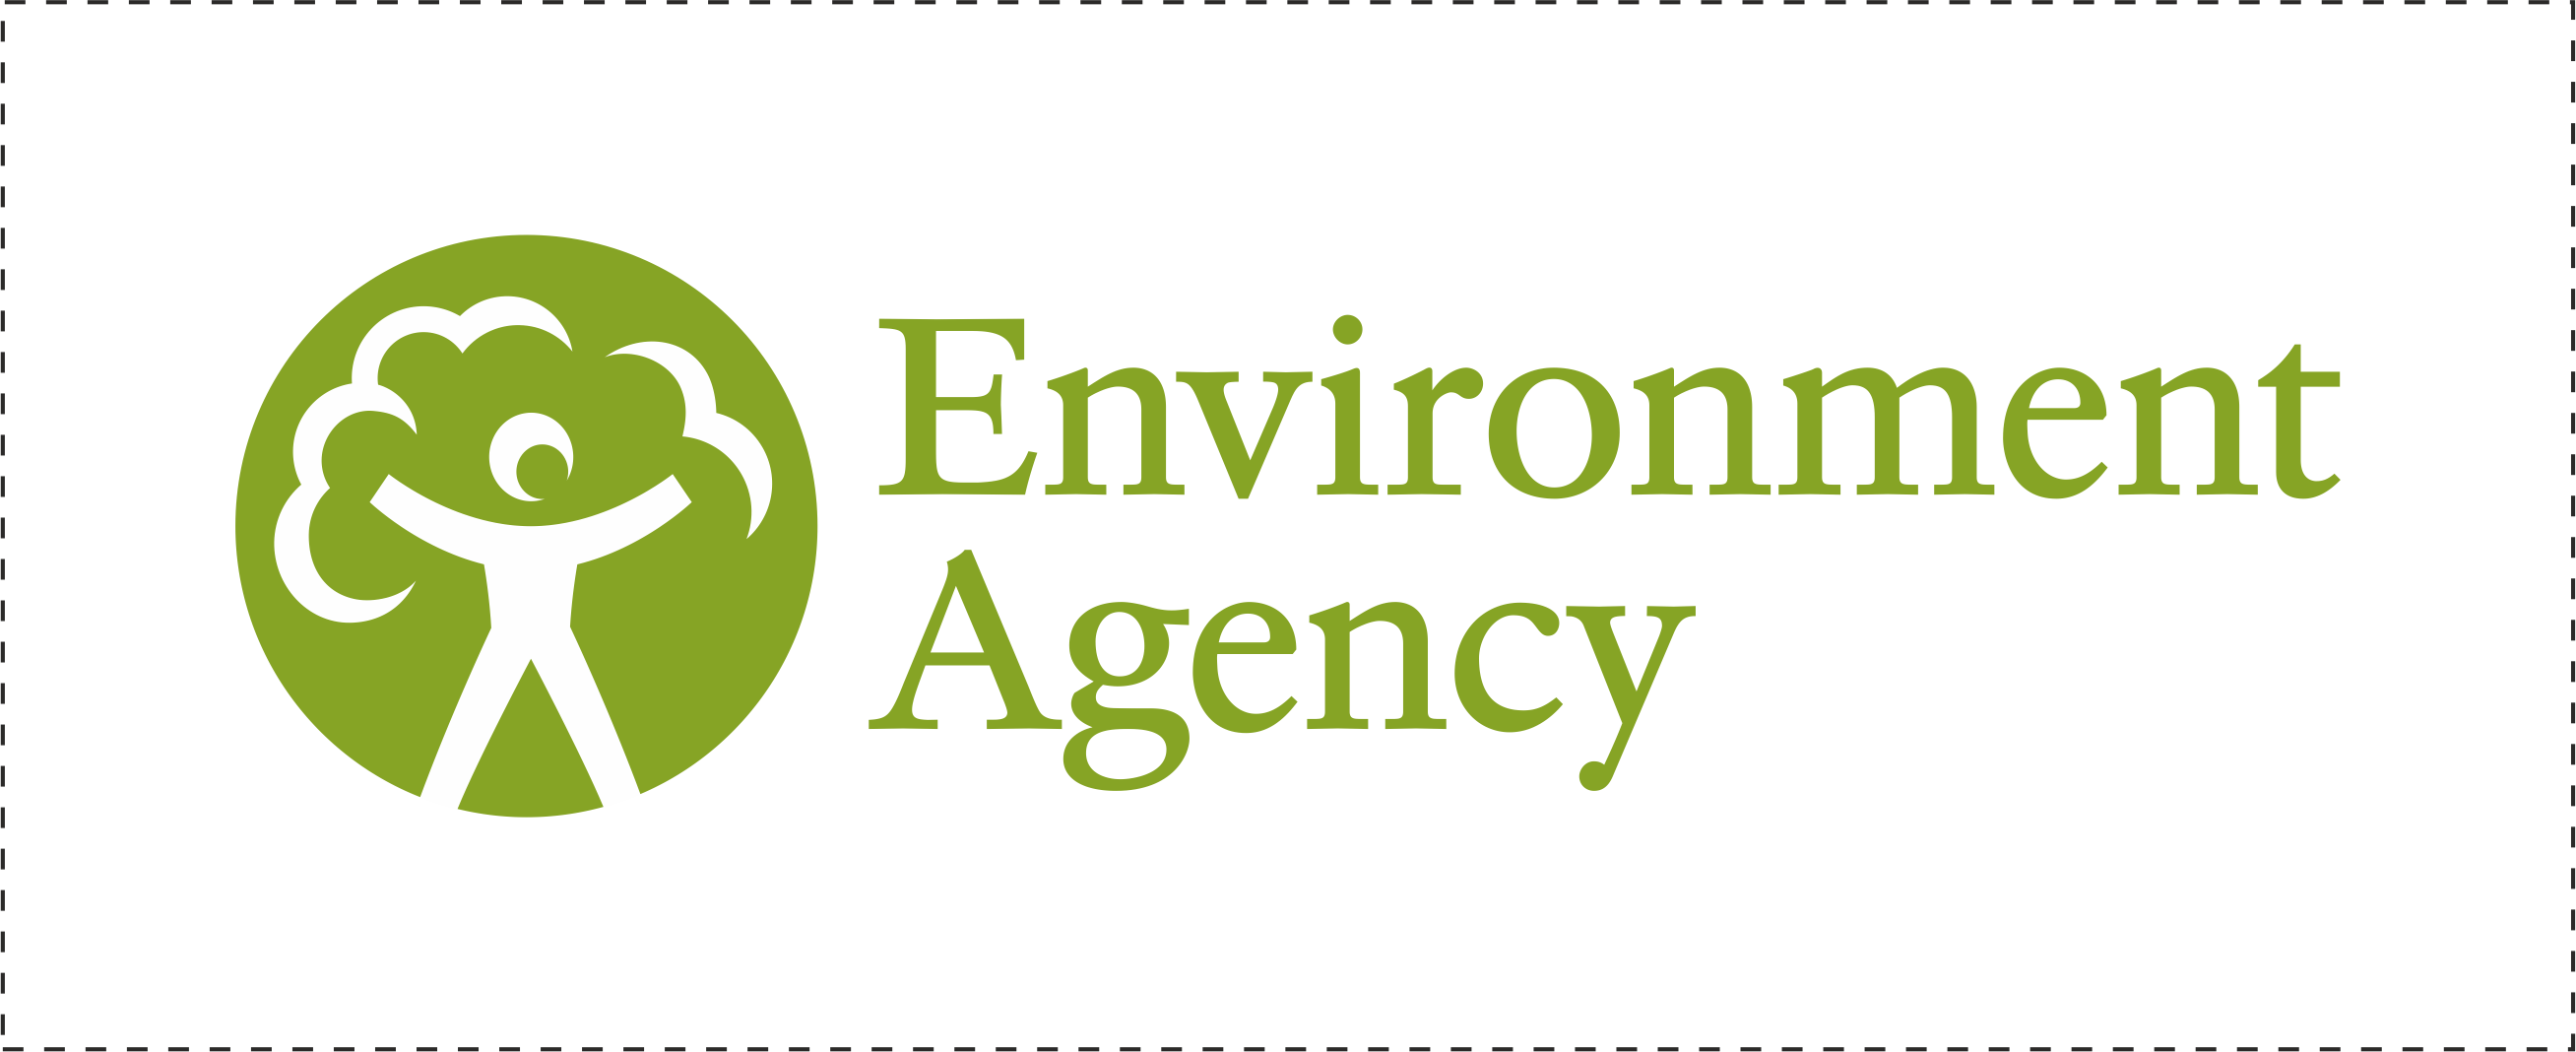 The logo of the Environment Agency